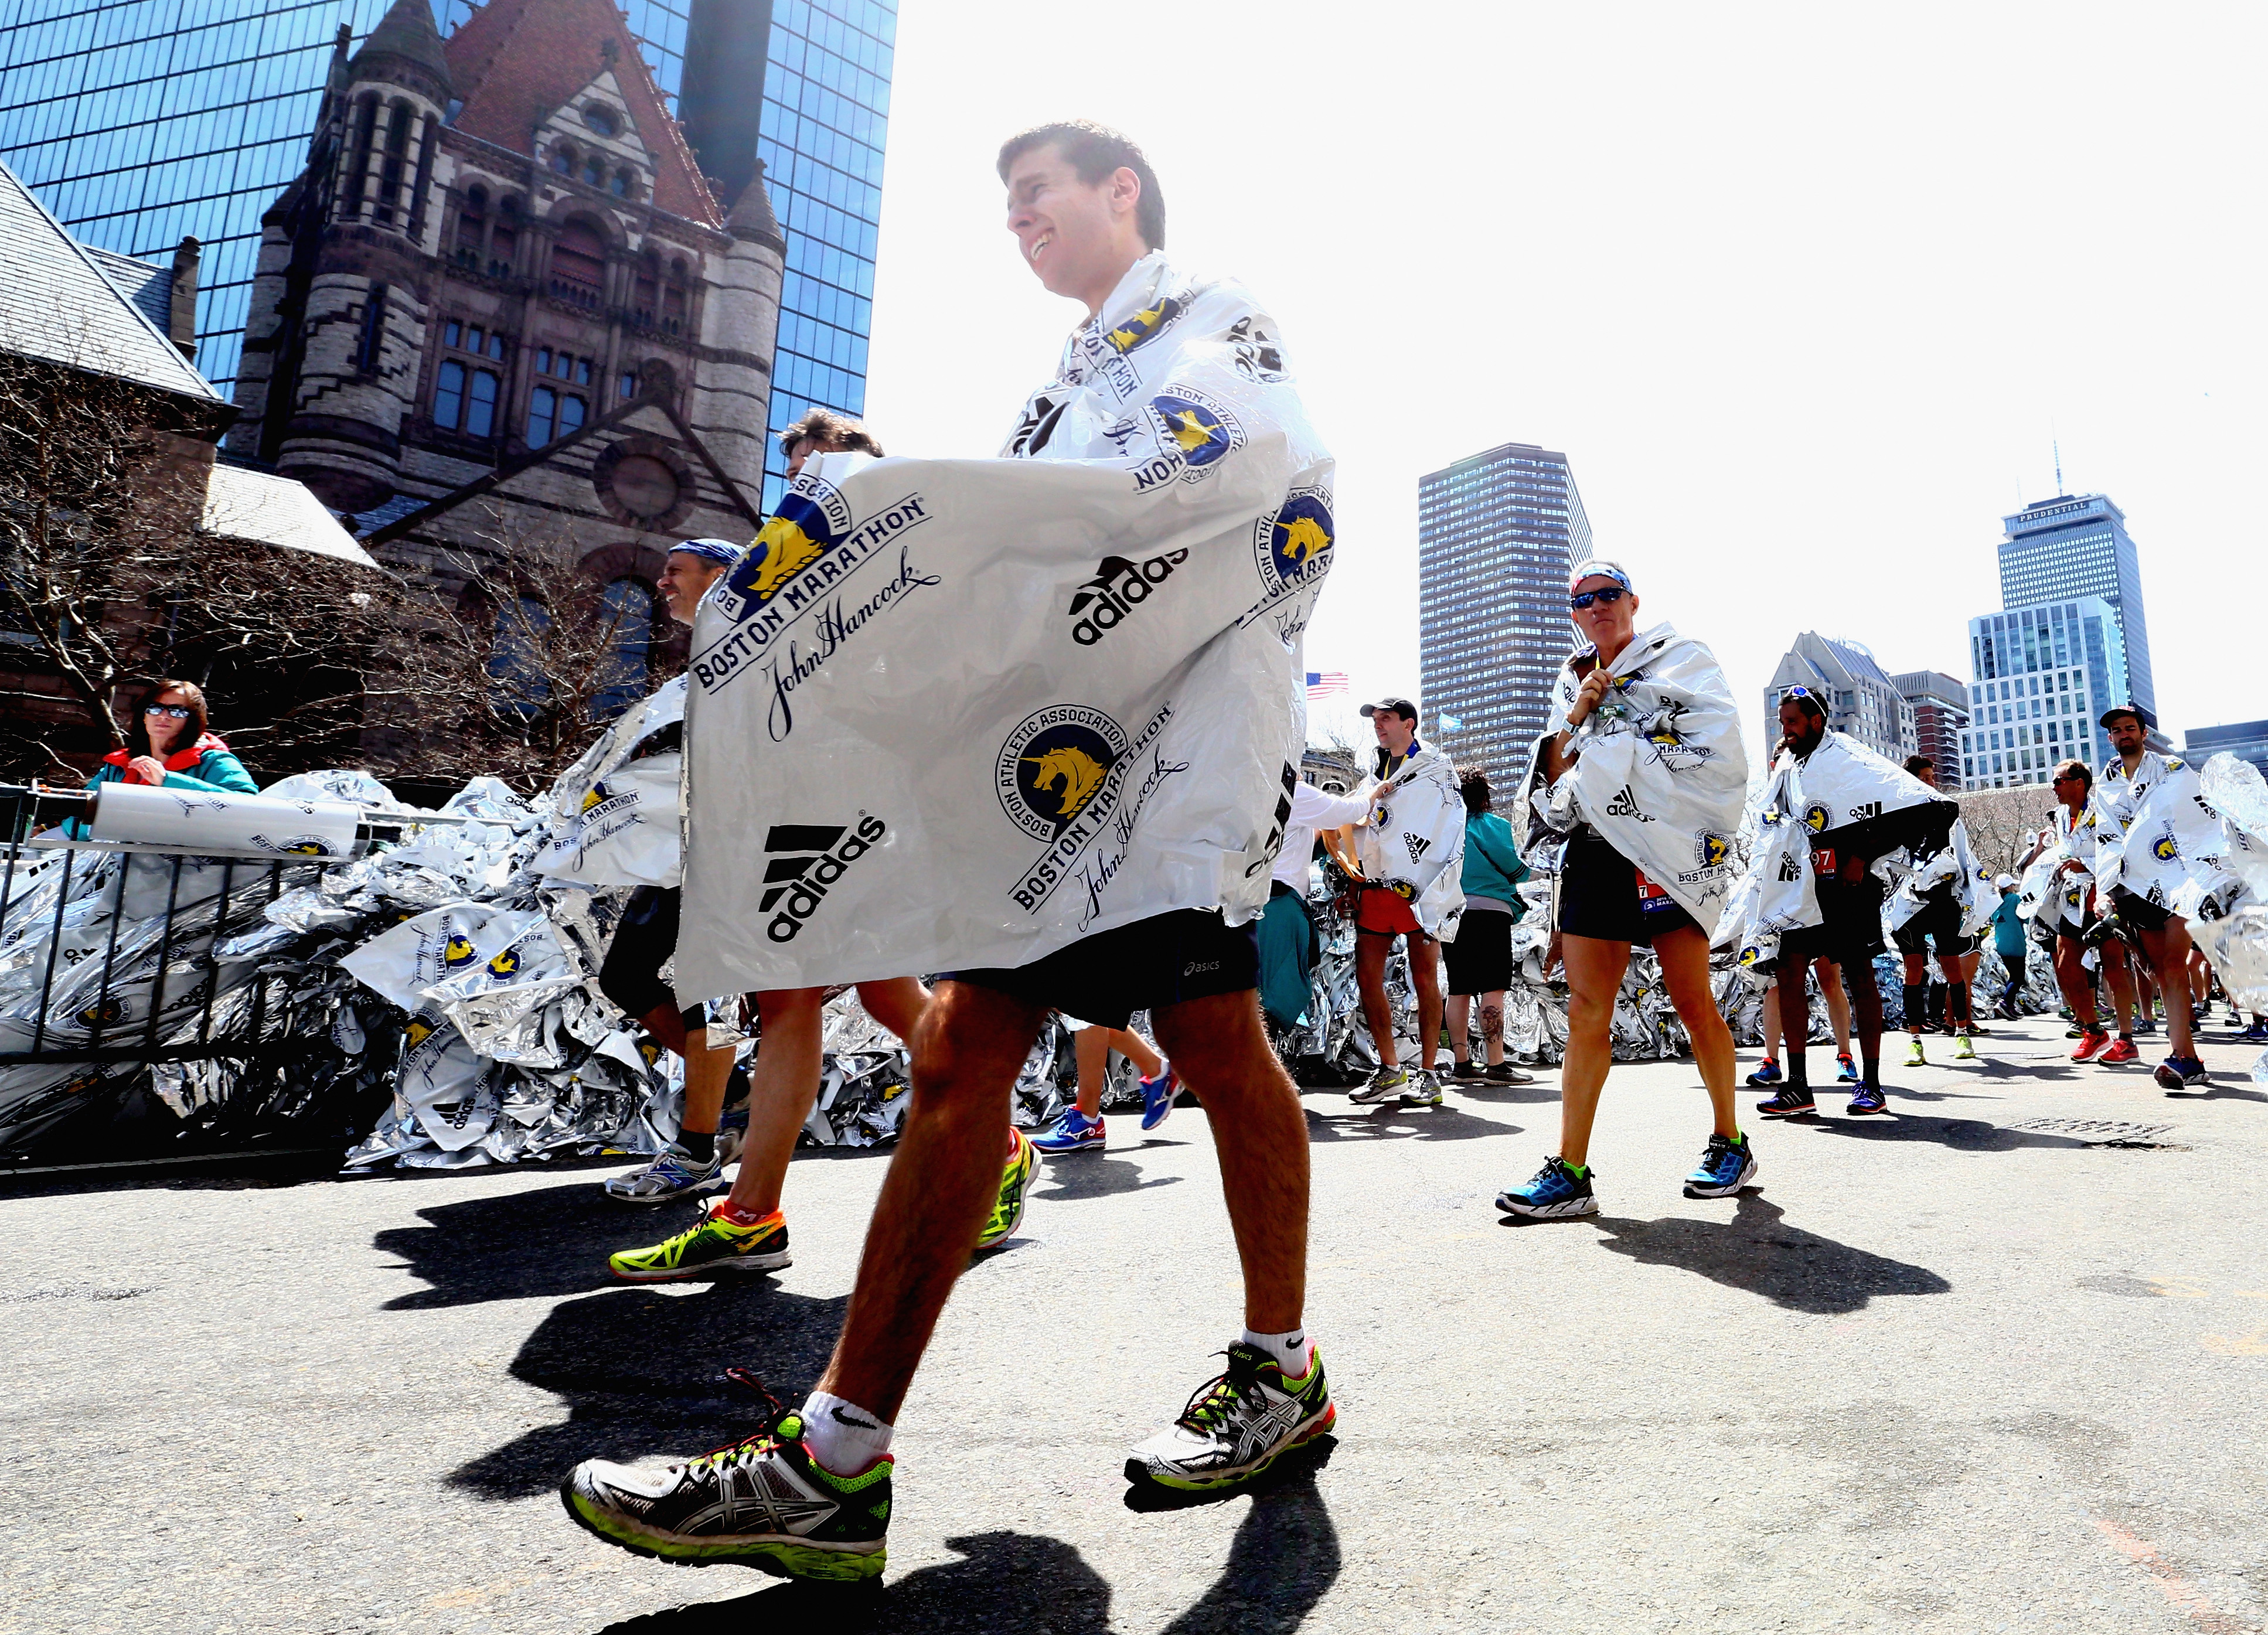 Runners are seen wearing blankets after completing the 120th Boston Marathon on April 18, 2016 in Boston, Massachusetts. (Maddie Meyer, Getty Images)